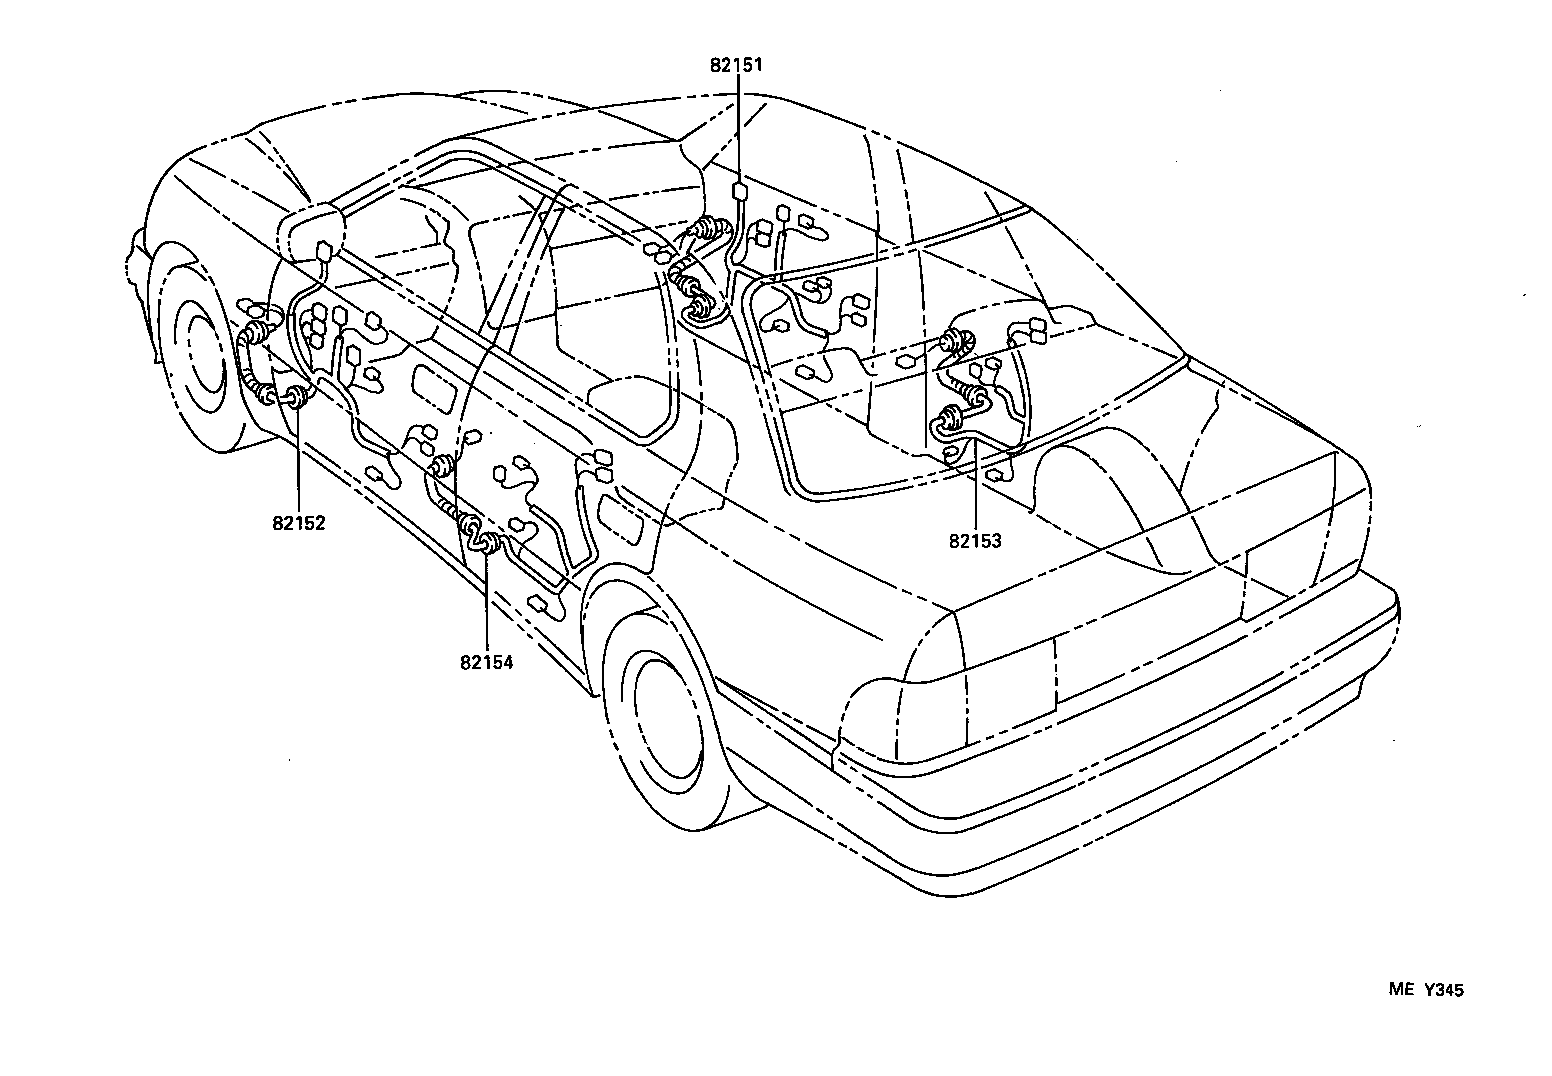  LS400 |  WIRING CLAMP